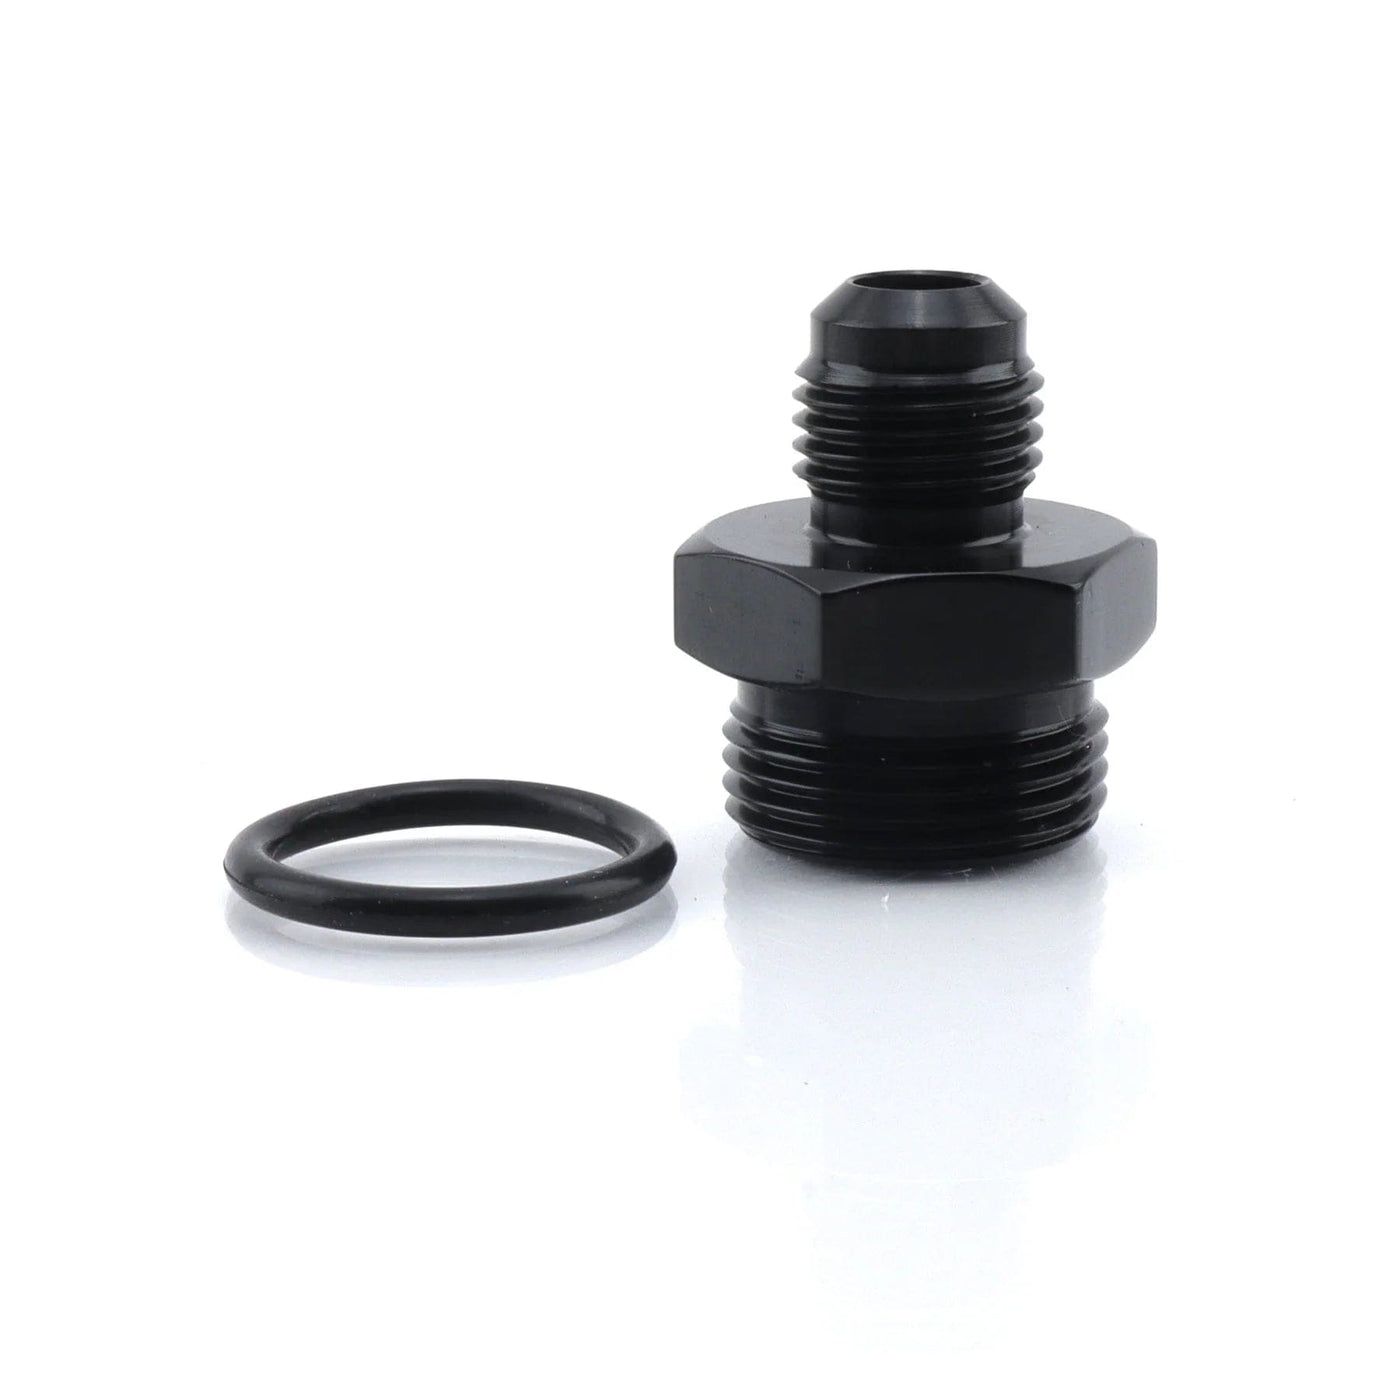 DC Sports -6 to m22x1.5 ORB DC SPORTS AN ADAPTER